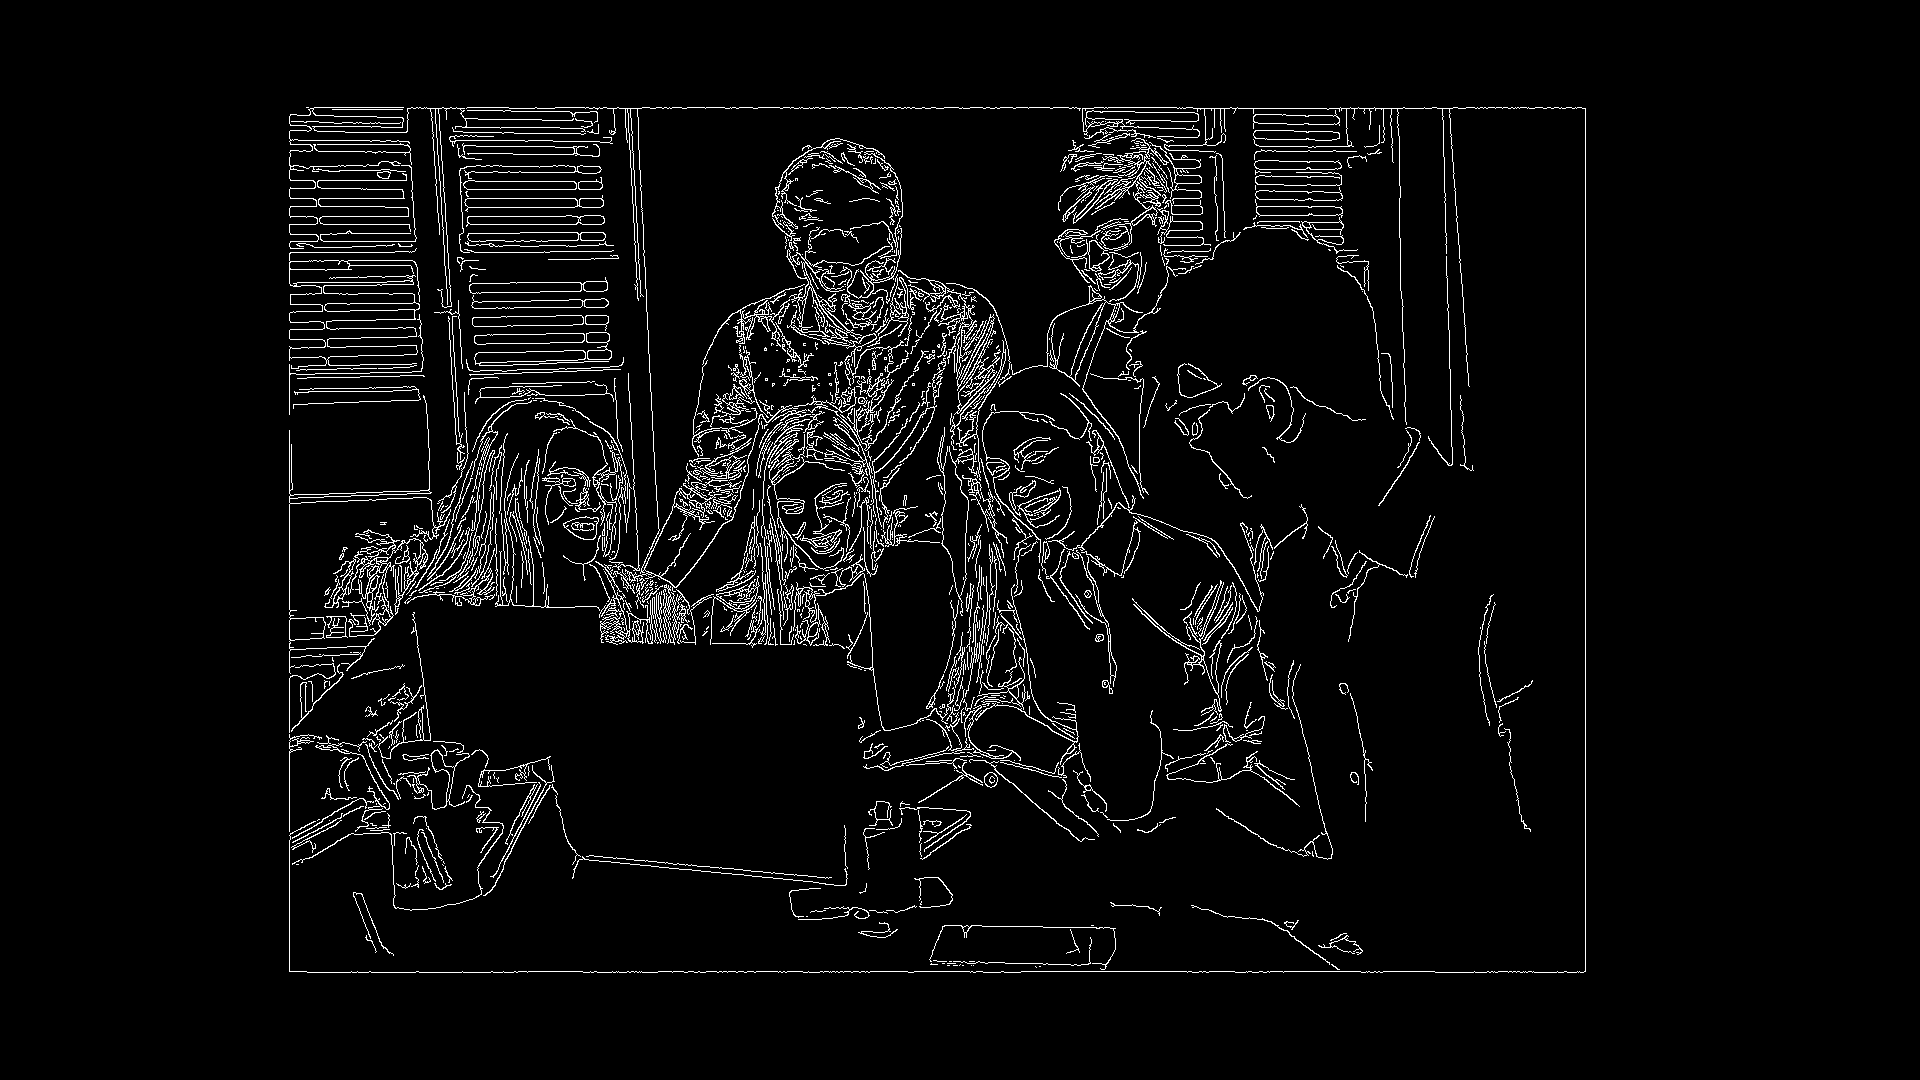 Office workers surrounding a laptop(Grayscale). Source: Canva